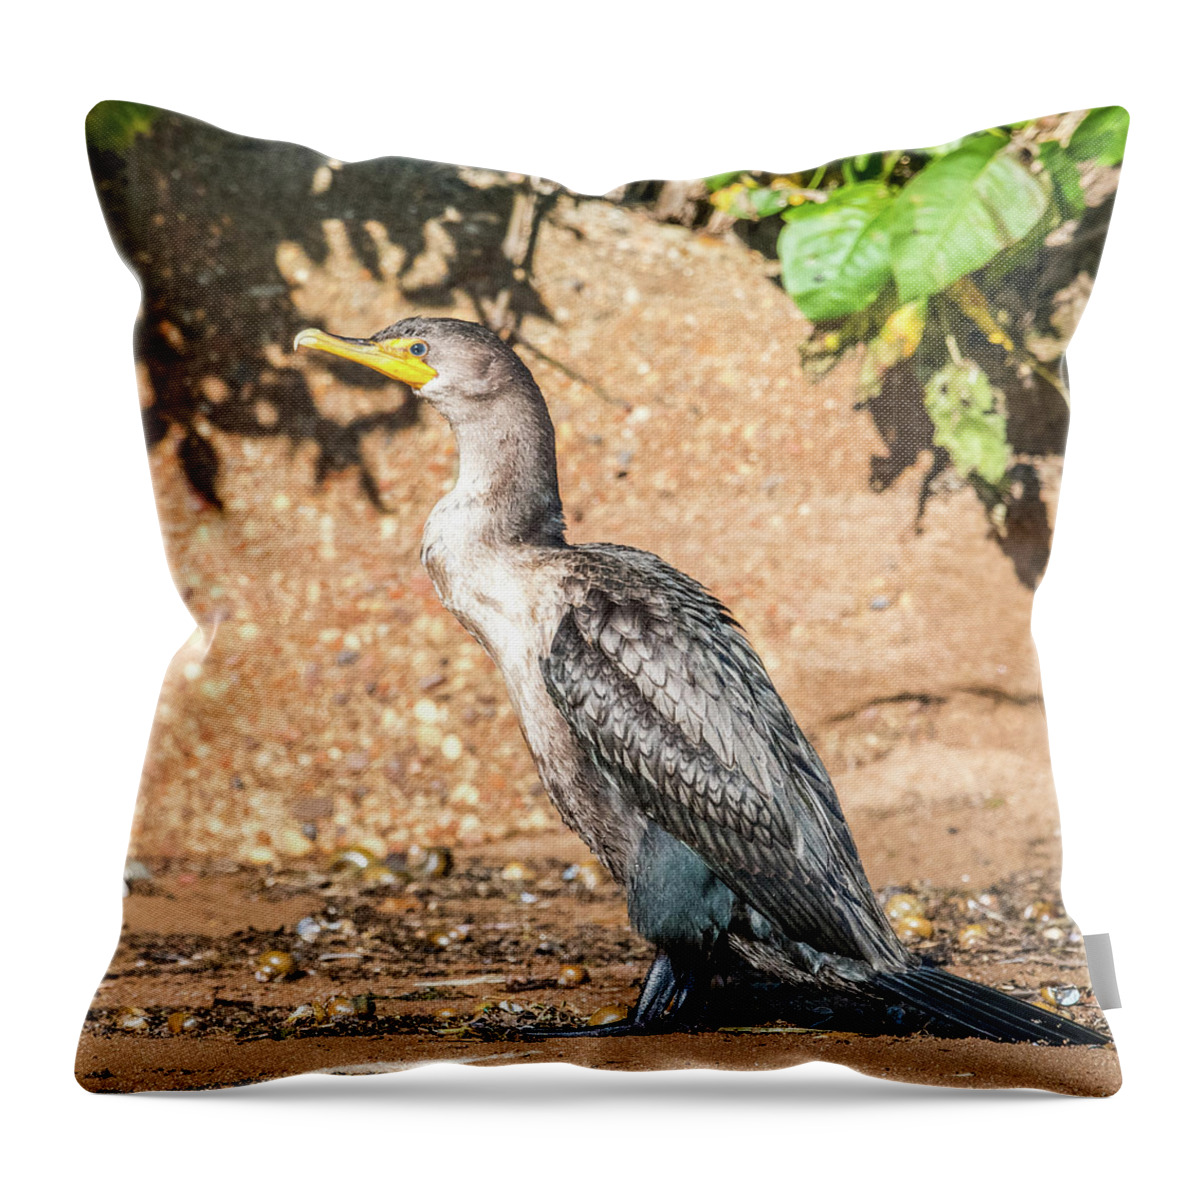 Cormorant Throw Pillow featuring the photograph Cormorant on Shore by Paul Freidlund